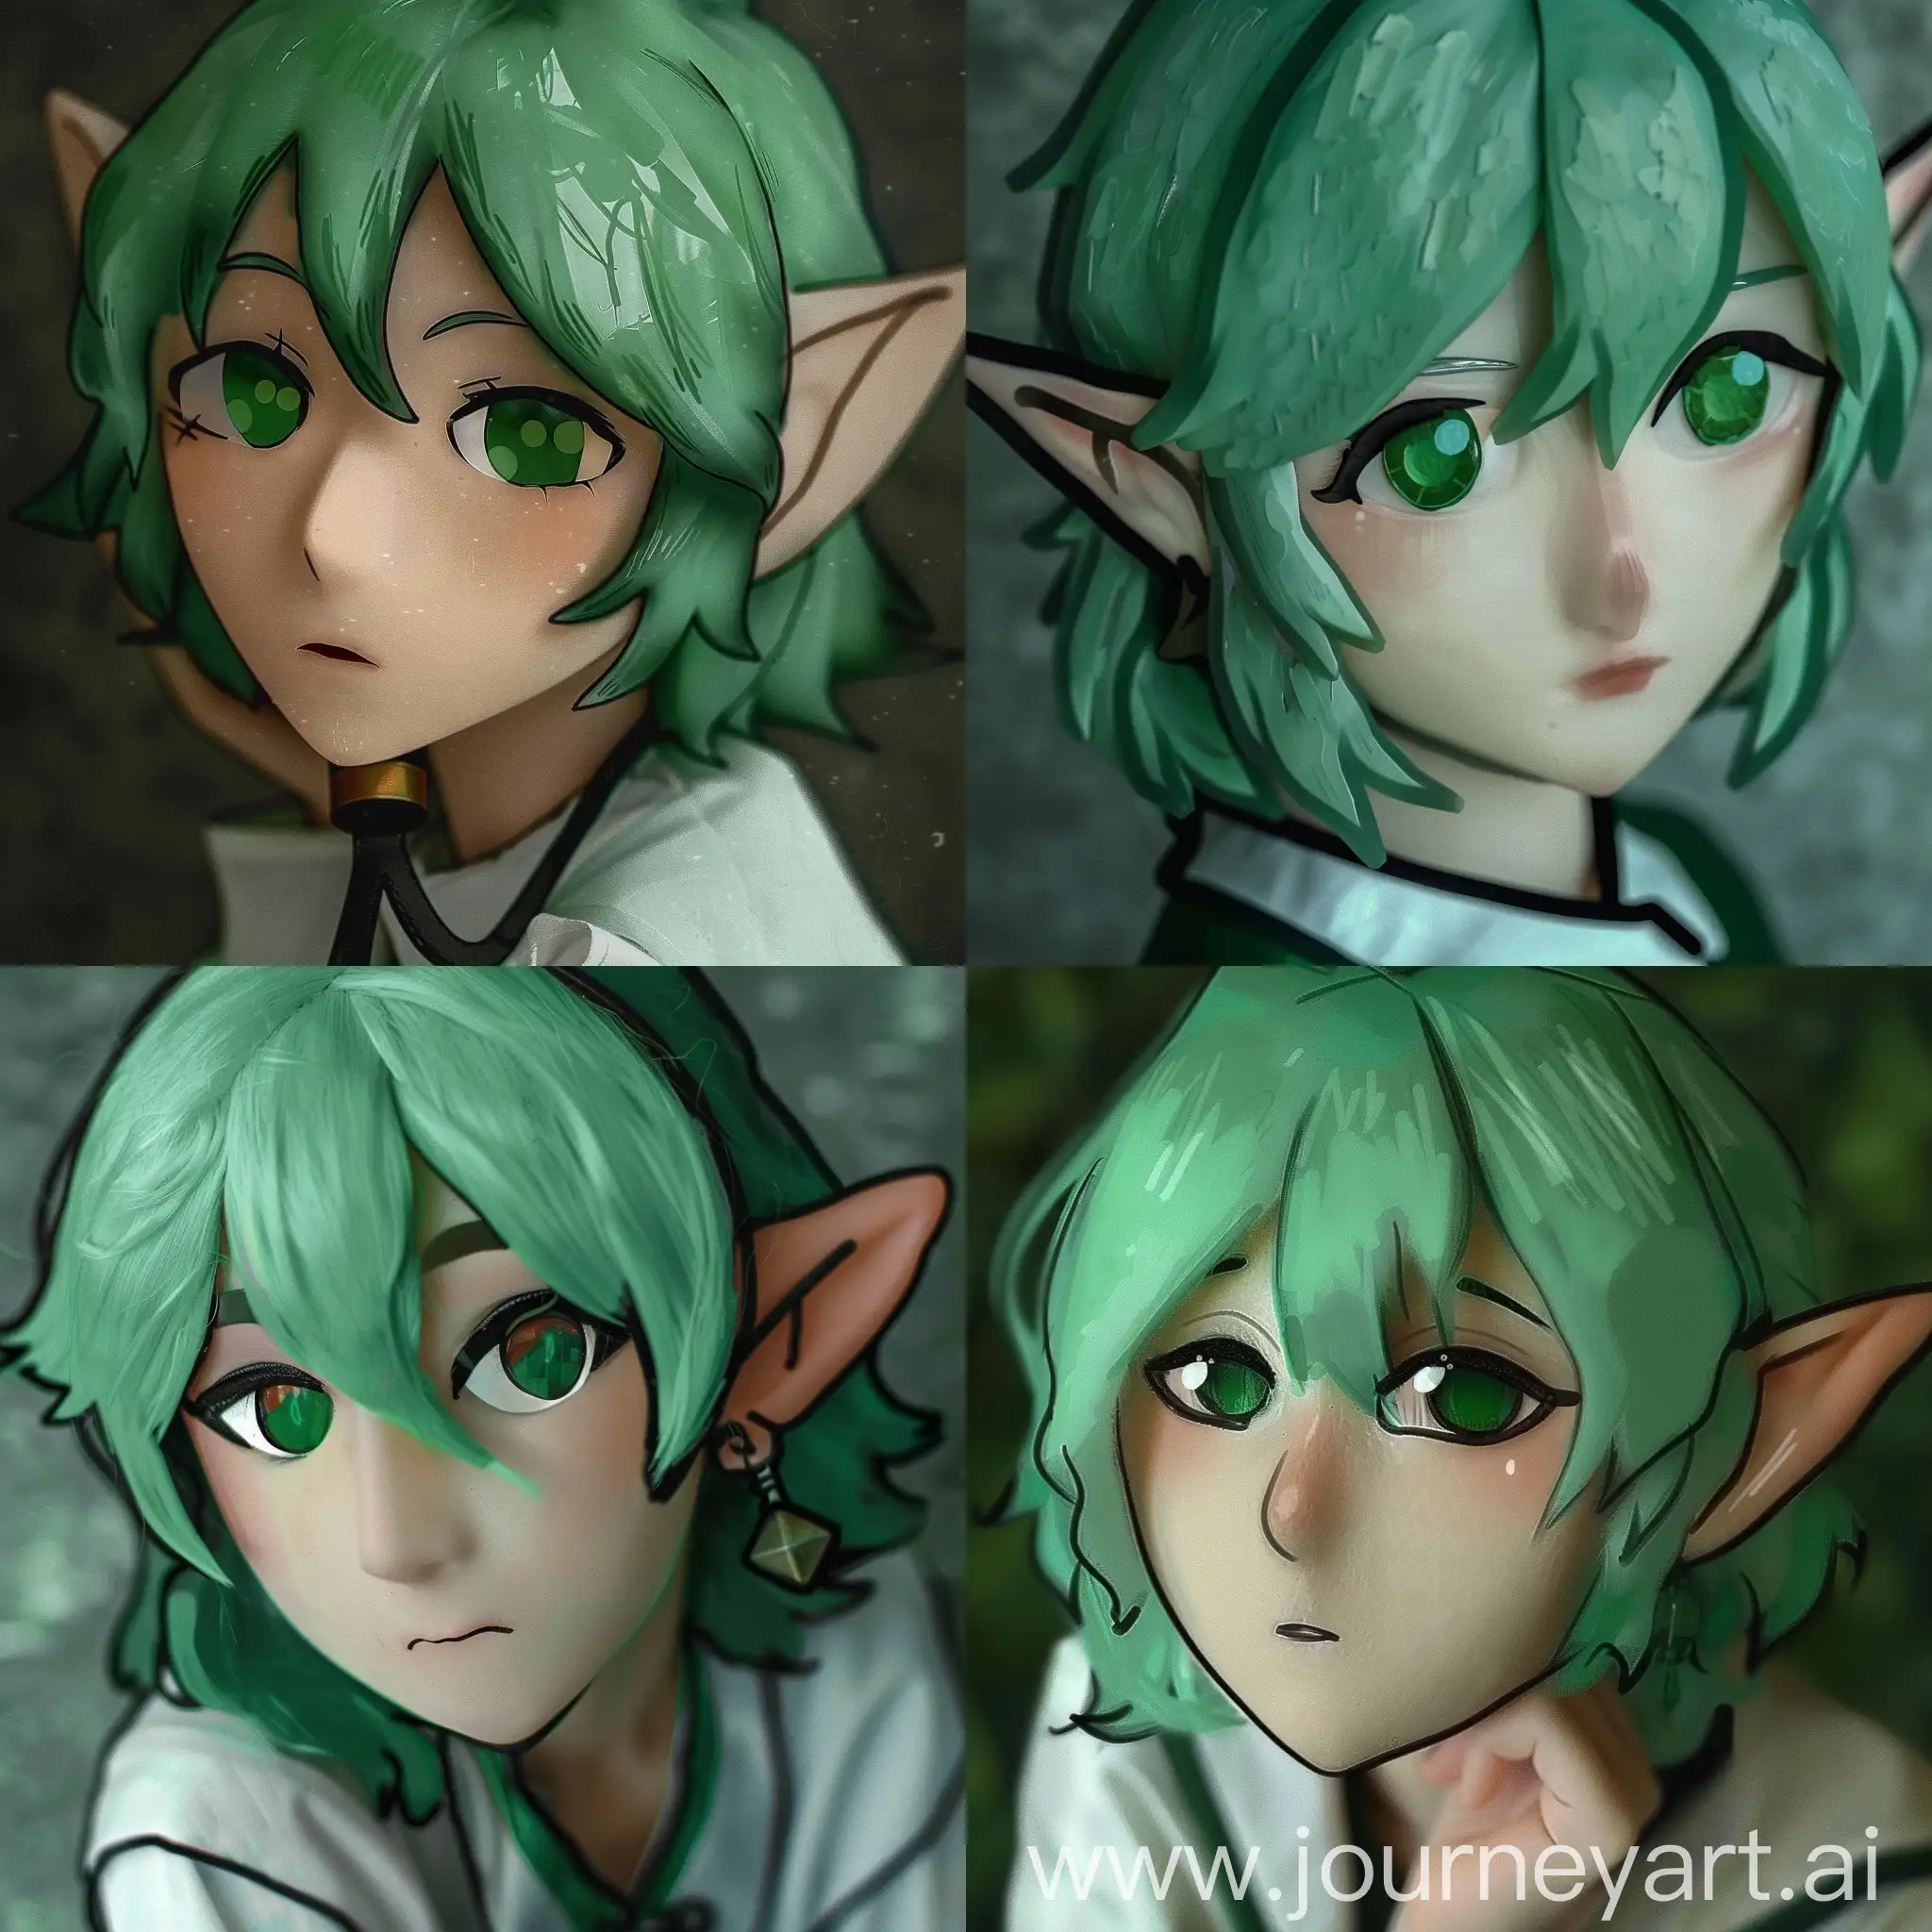 Elf-with-Green-Hair-and-Eyes